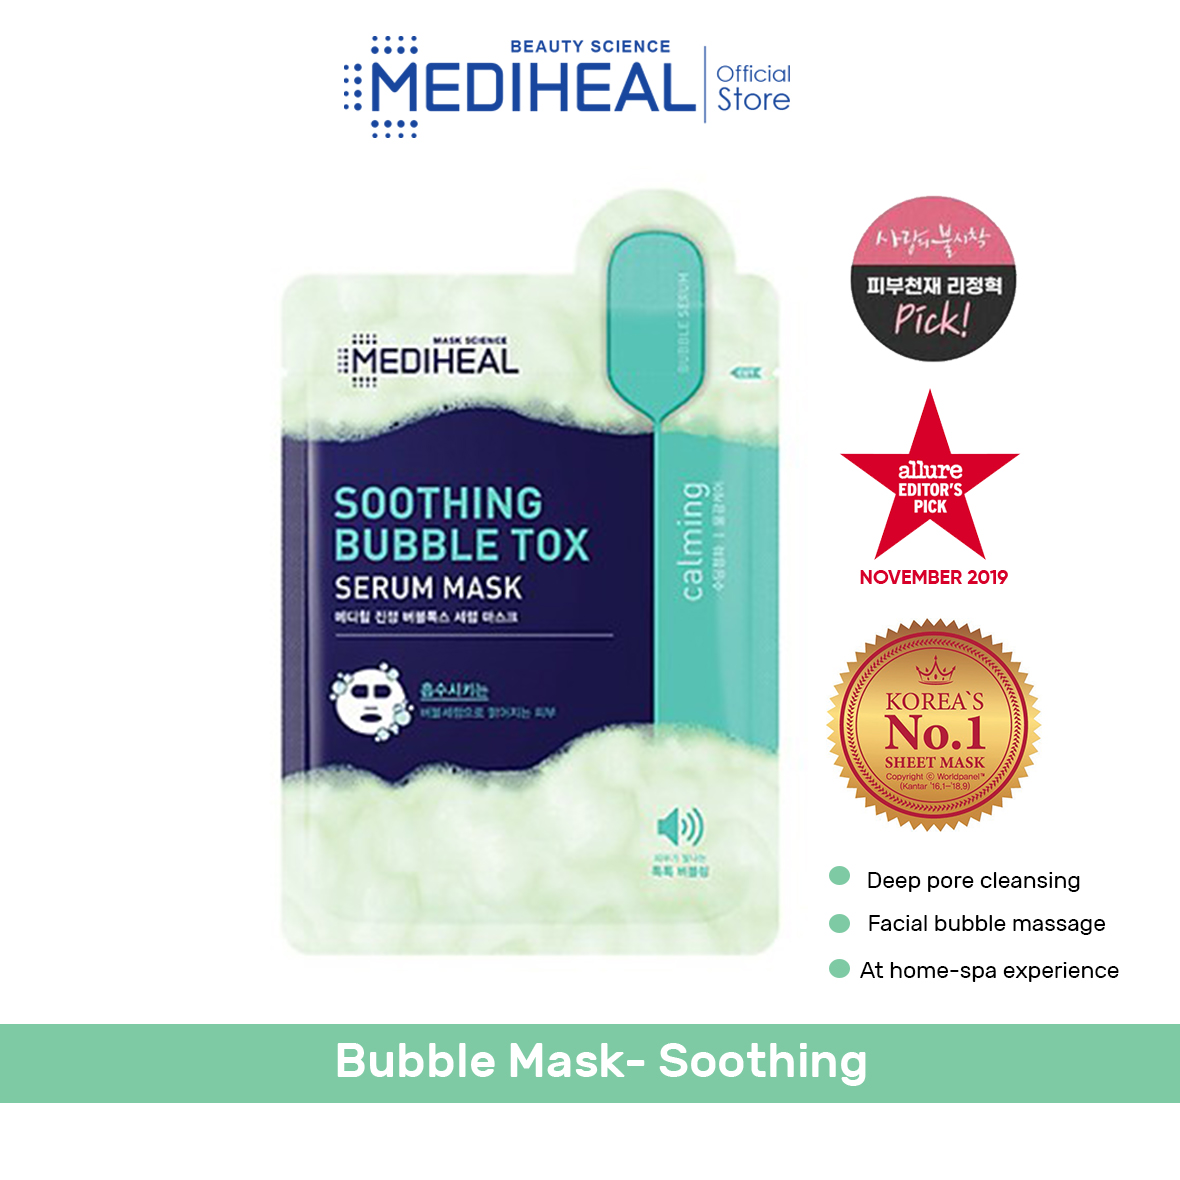 Mediheal Soothing Bubble Tox Serum Mask